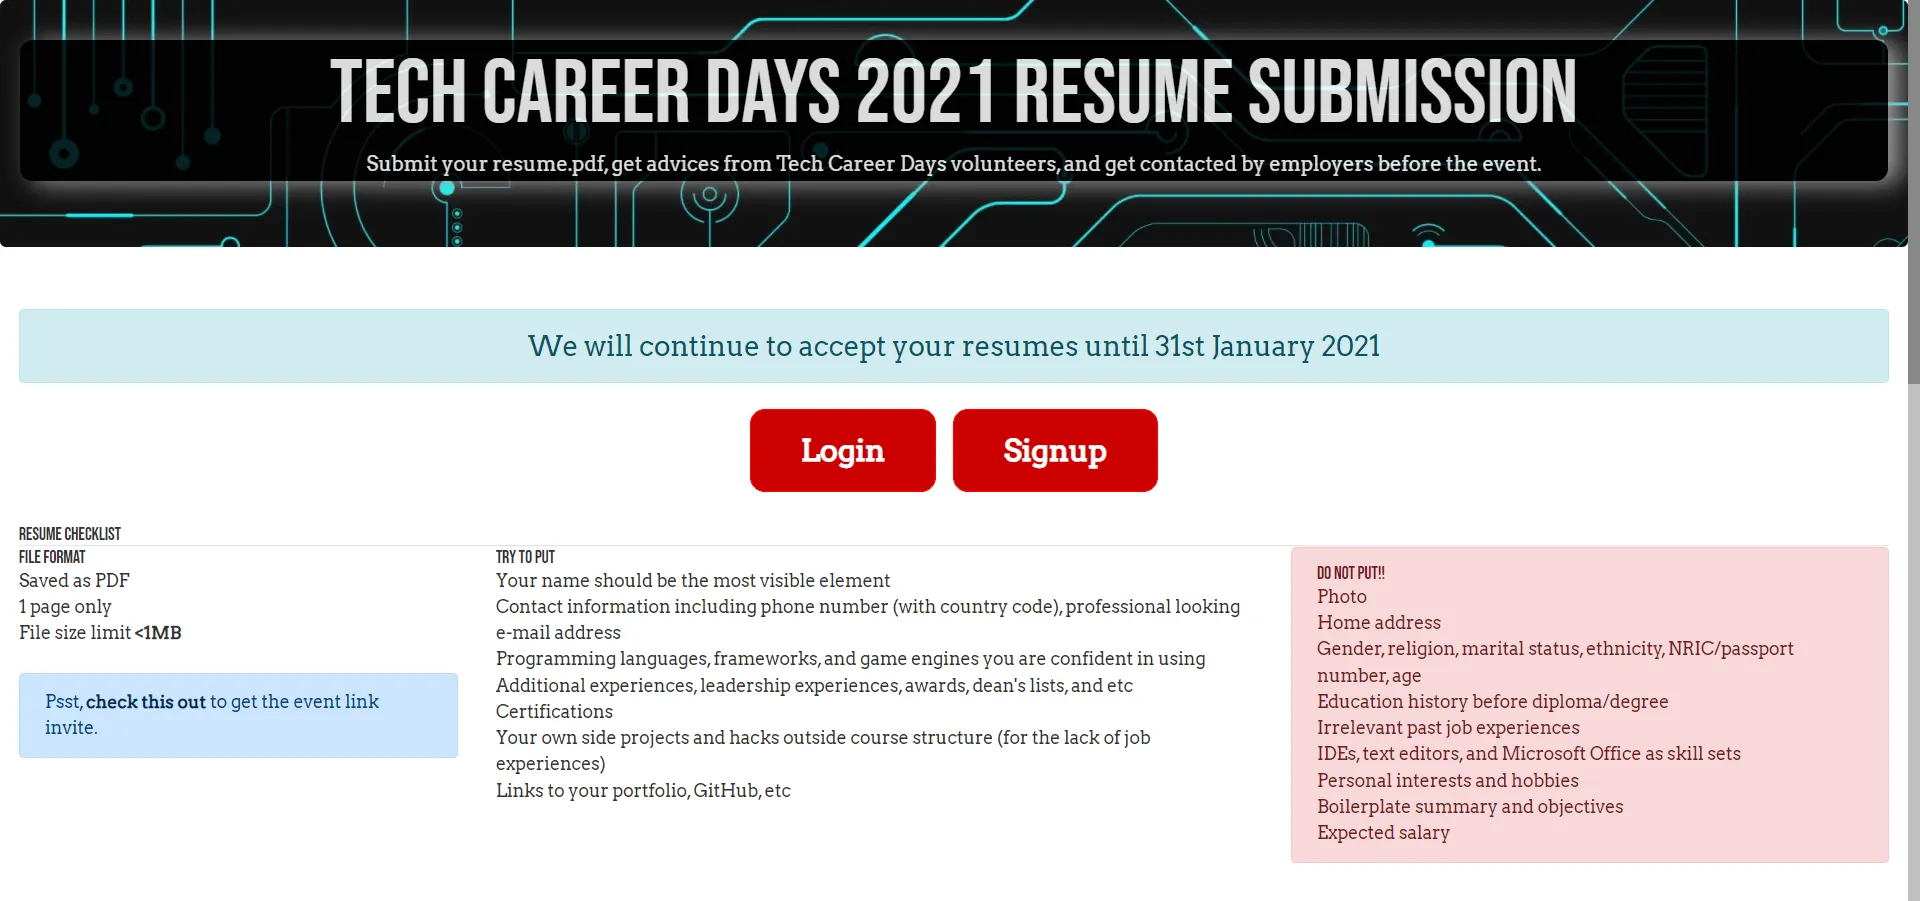 Screenshot of Tech Career Days 2021 Resume Submission Portal